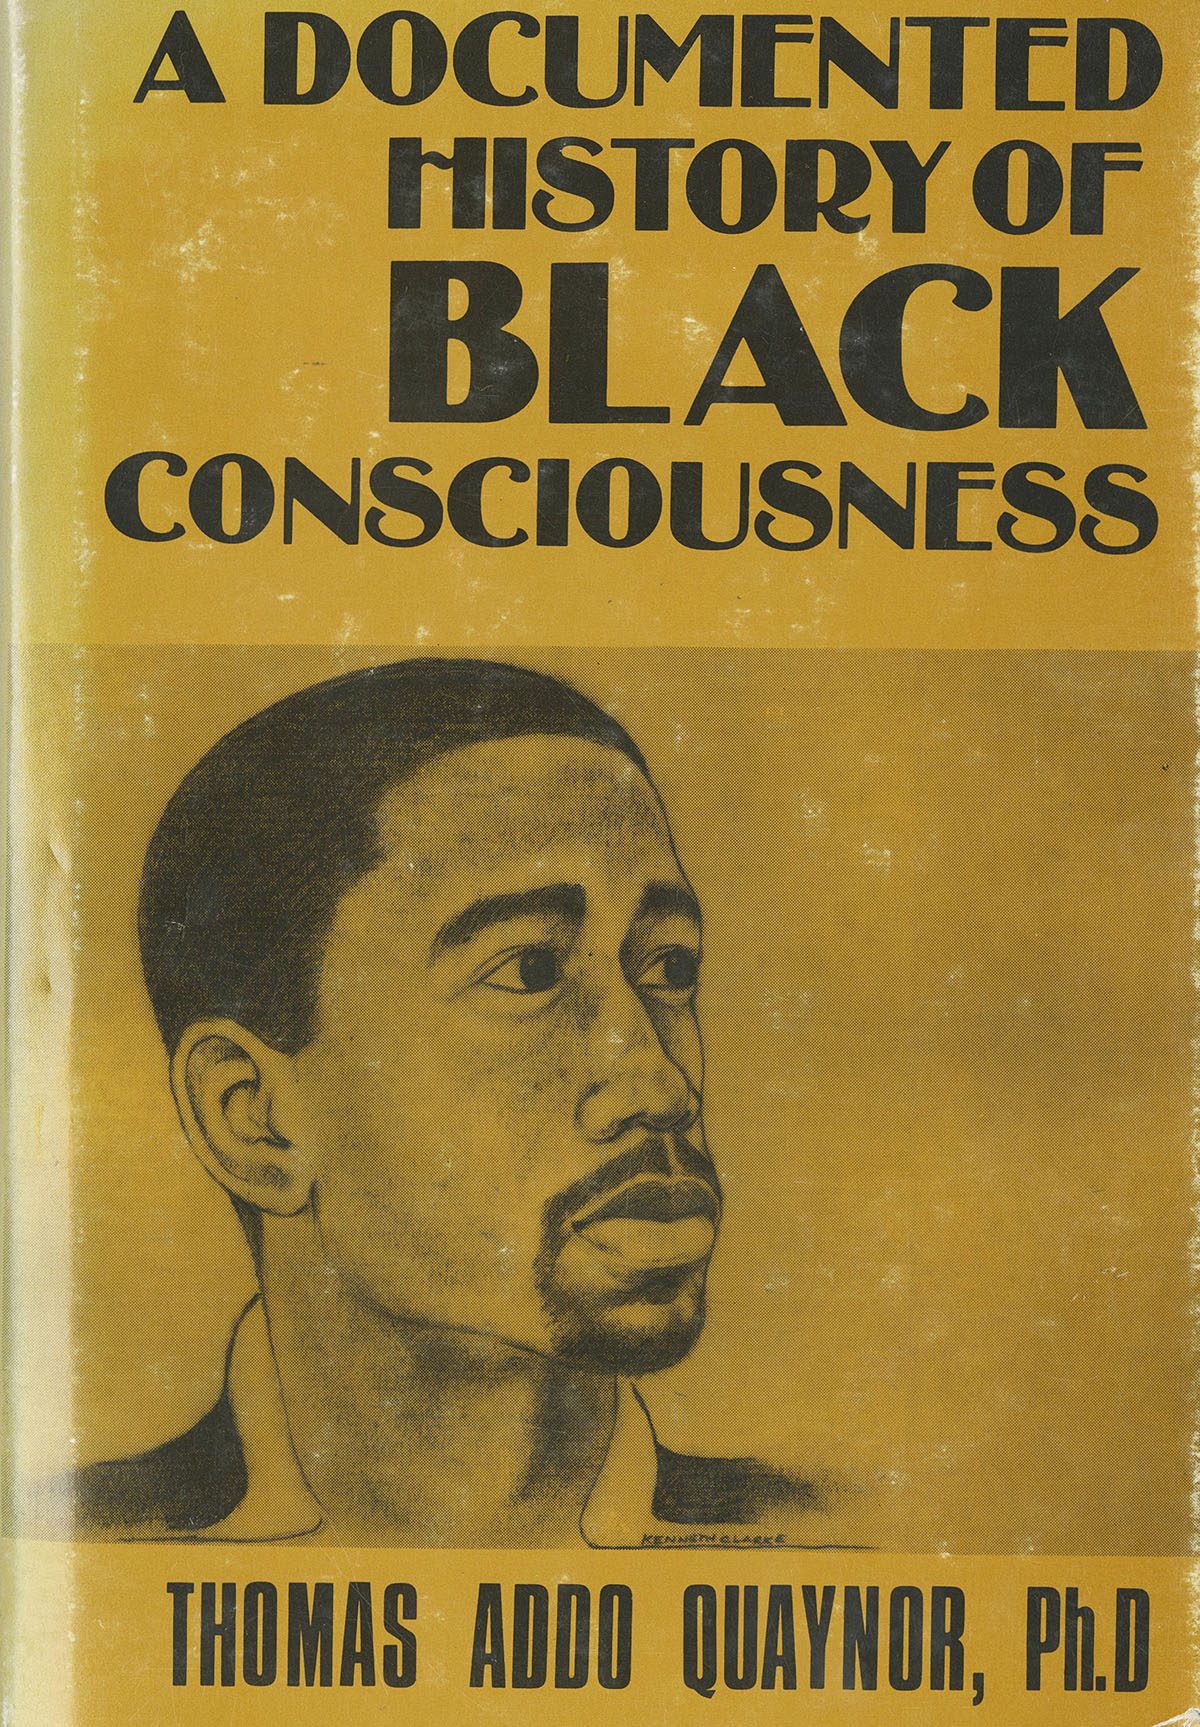 Front cover of the book A Documented History of Black Consciousness.